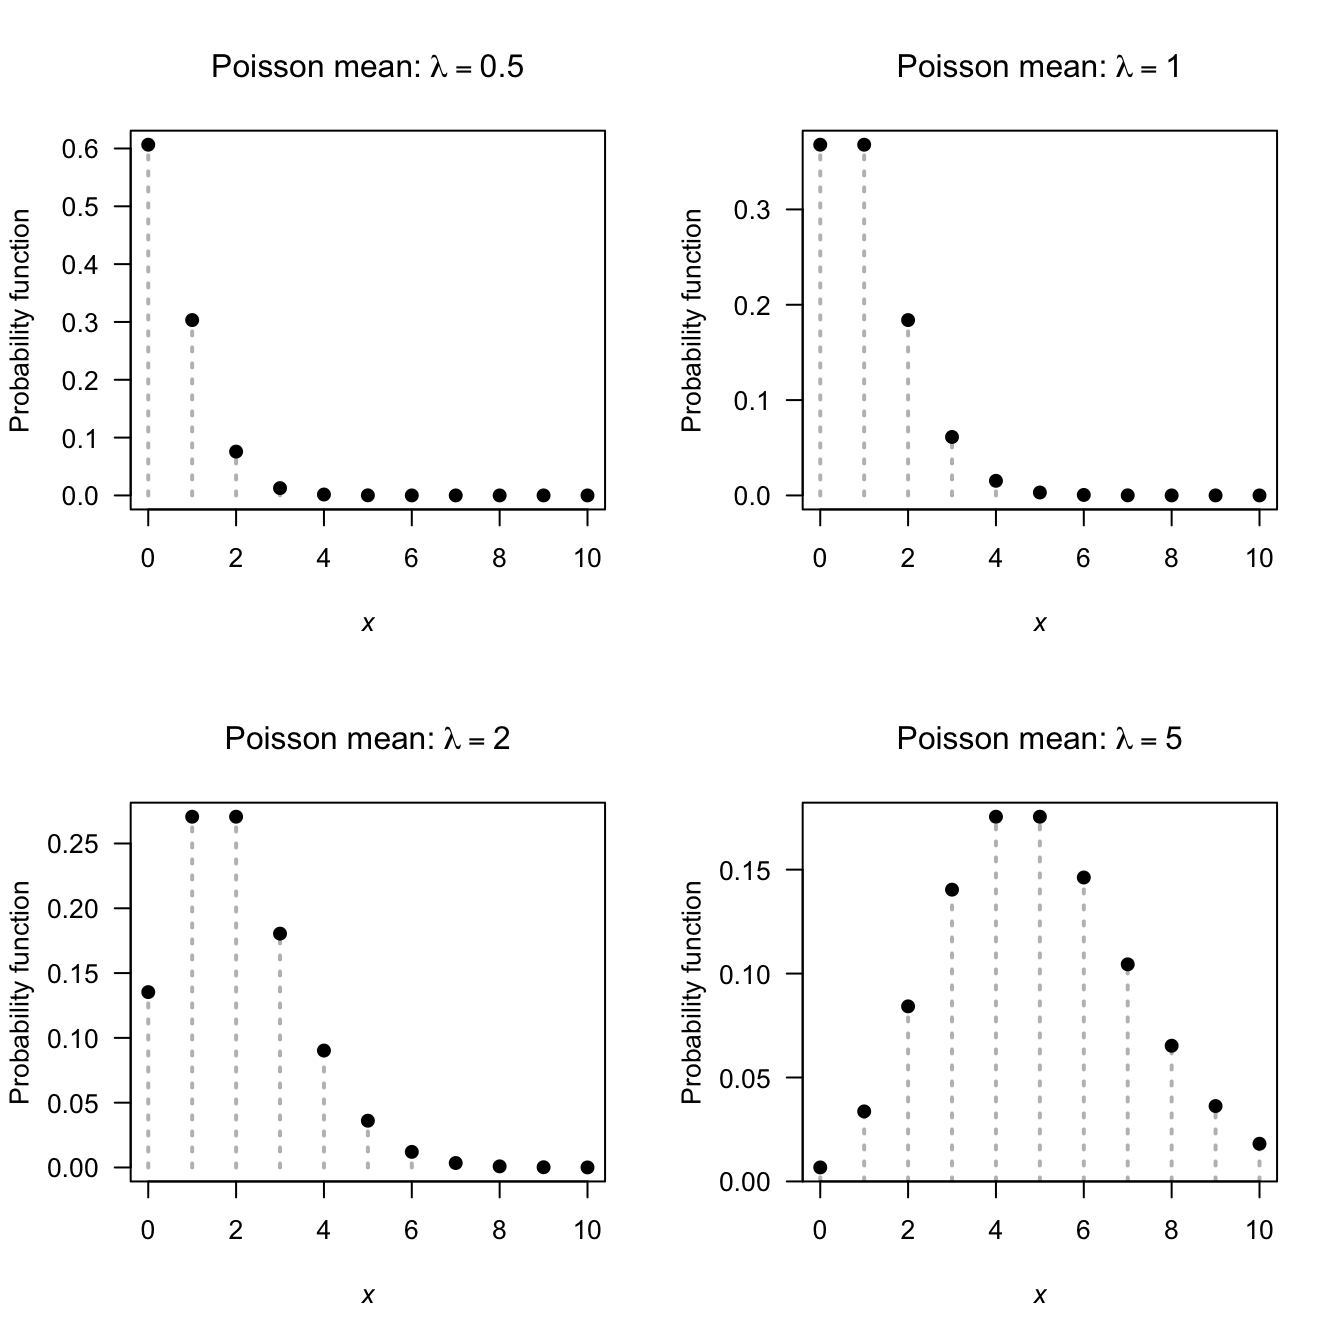 The pf for the Poisson distribution for various values of $\lambda$